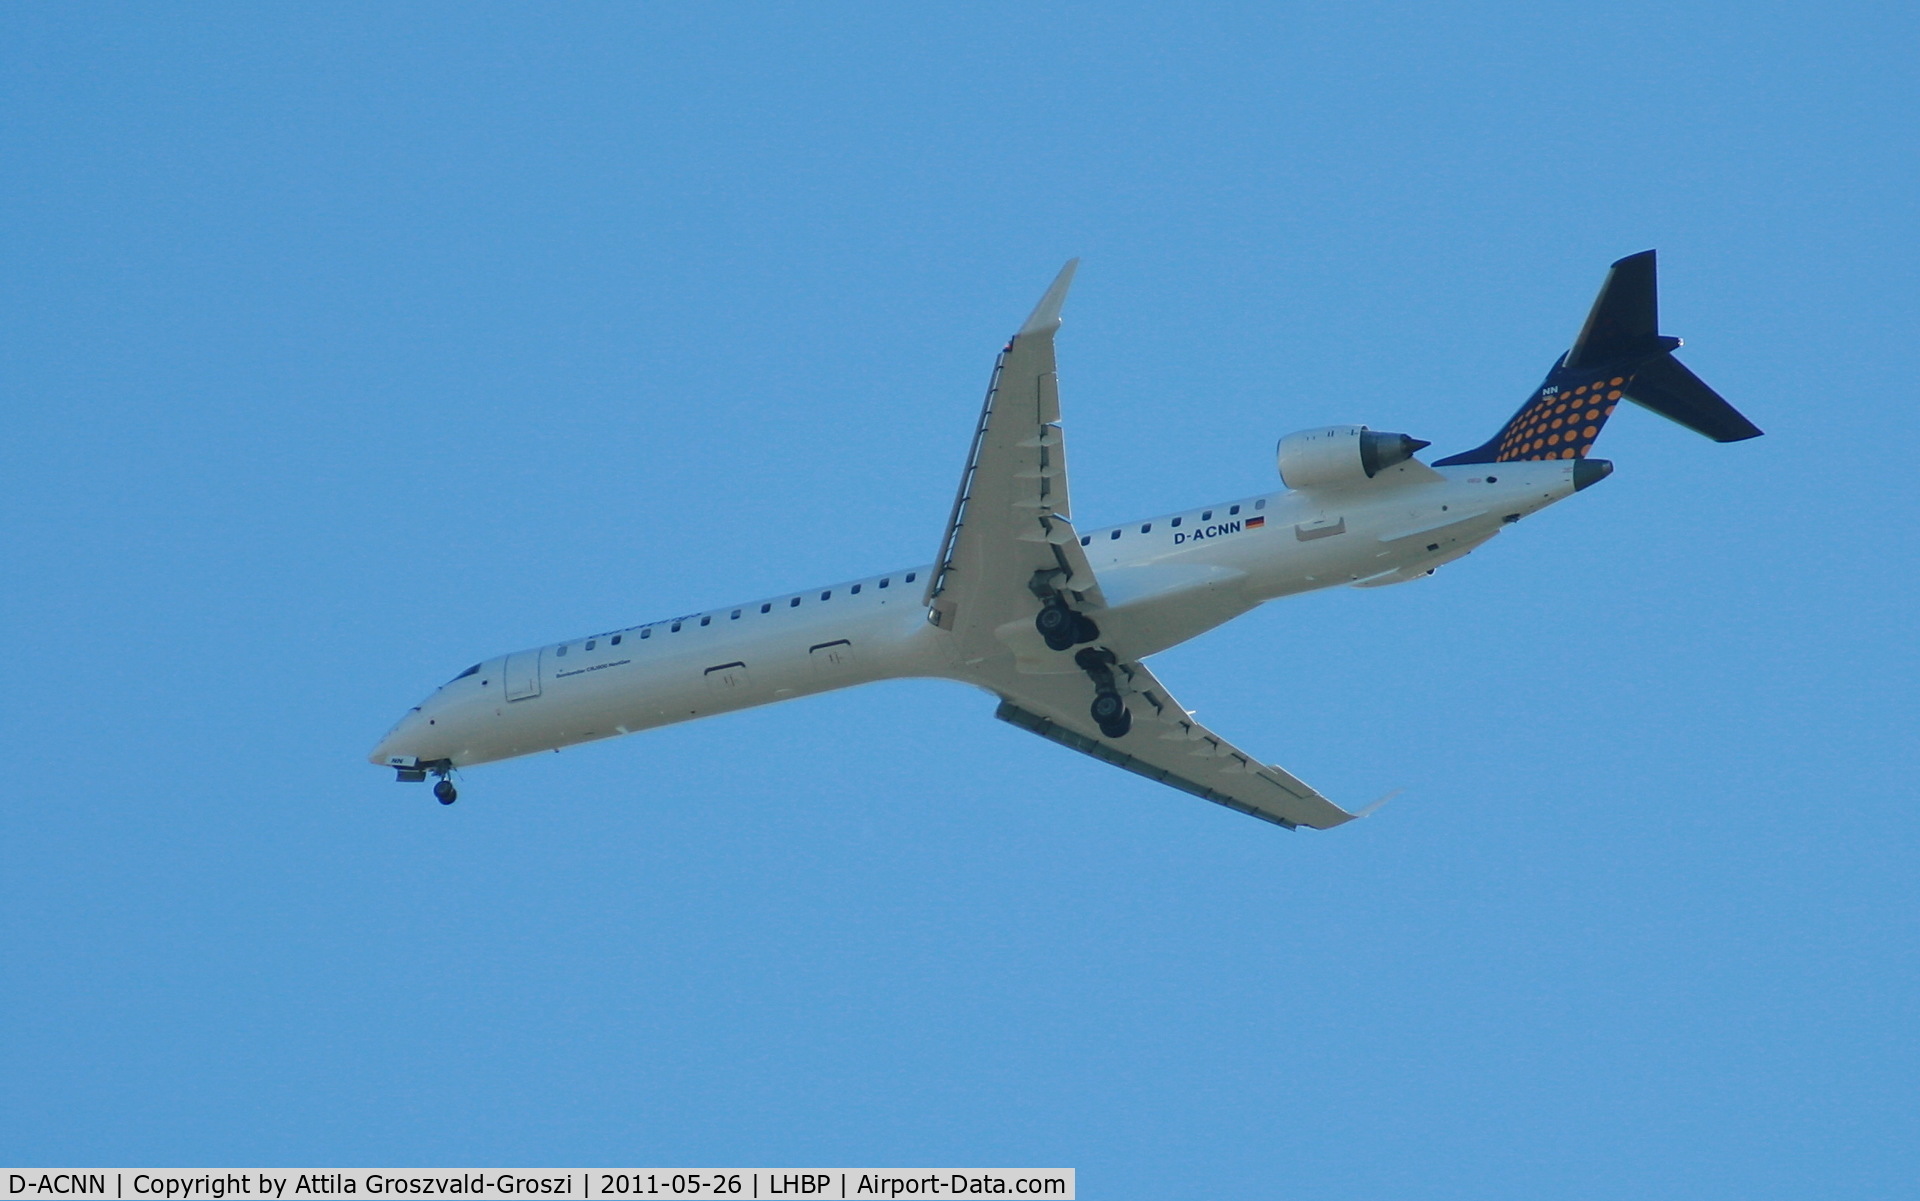 D-ACNN, 2010 Bombardier CRJ-900LR (CL-600-2D24) C/N 15254, Getting off direction Budapest Liszt Ferenc onto an International Airport, in Üllö city airspace.